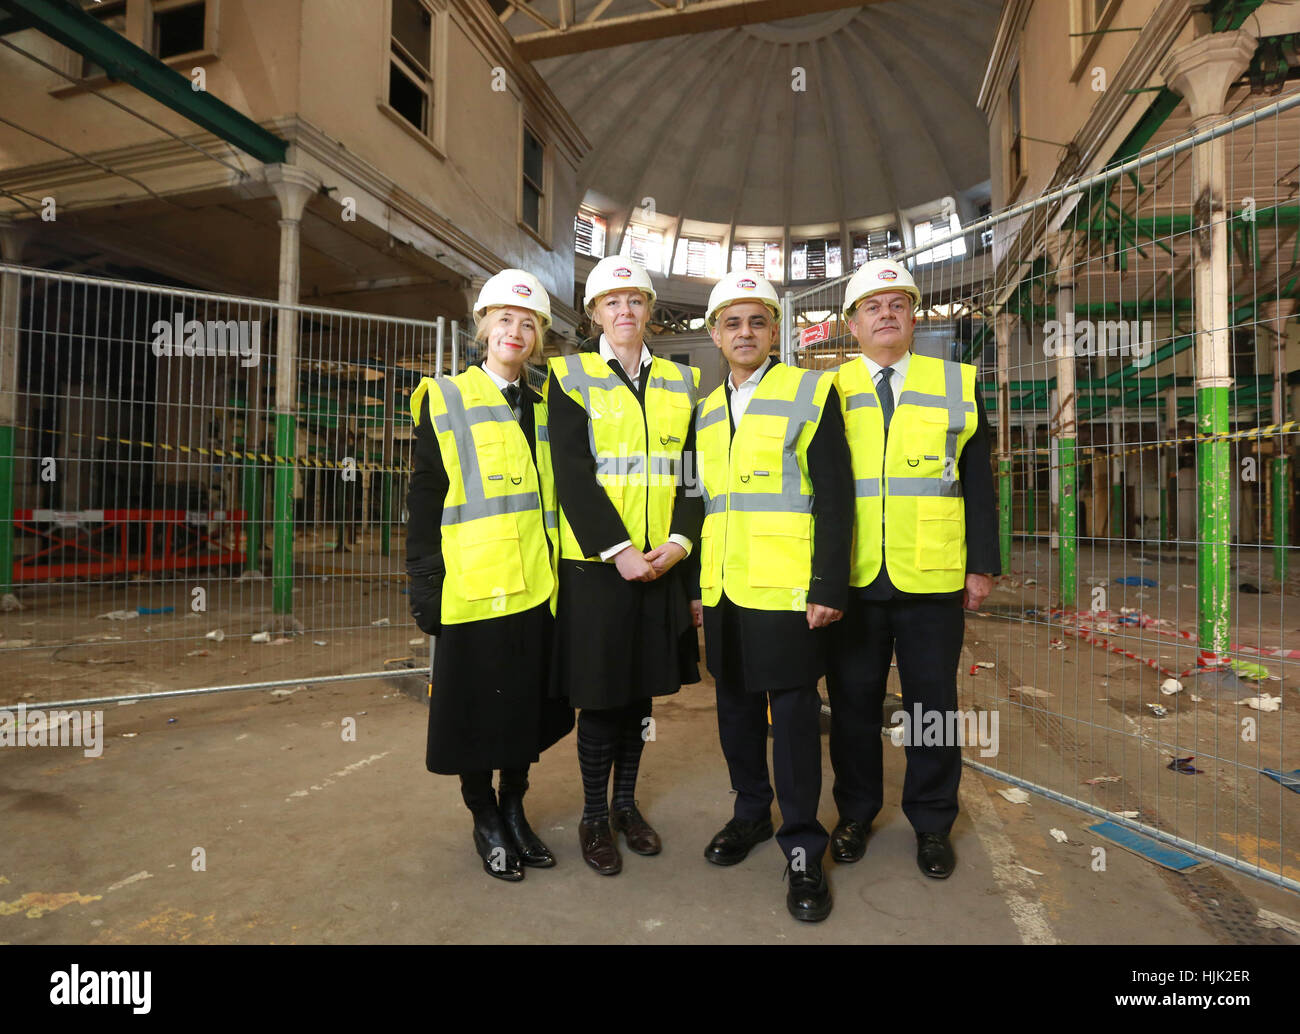 EDITORIAL USE ONLY (Left to right) Justine Simons, Deputy Mayor for Culture and the Creative Industries, Sharon Ament, Director of the Museum of London, Mayor of London Sadiq Khan and Mark Boleat, Chairman of the Policy and Resources Committee at the City of London Corporation, visit Smithfield General Market. Plans for a new Museum of London at West Smithfield have been given a major boost thanks to support from the City of London Corporation and the Mayor, who have pledged &pound;110 million and &pound;70 million respectively. Stock Photo